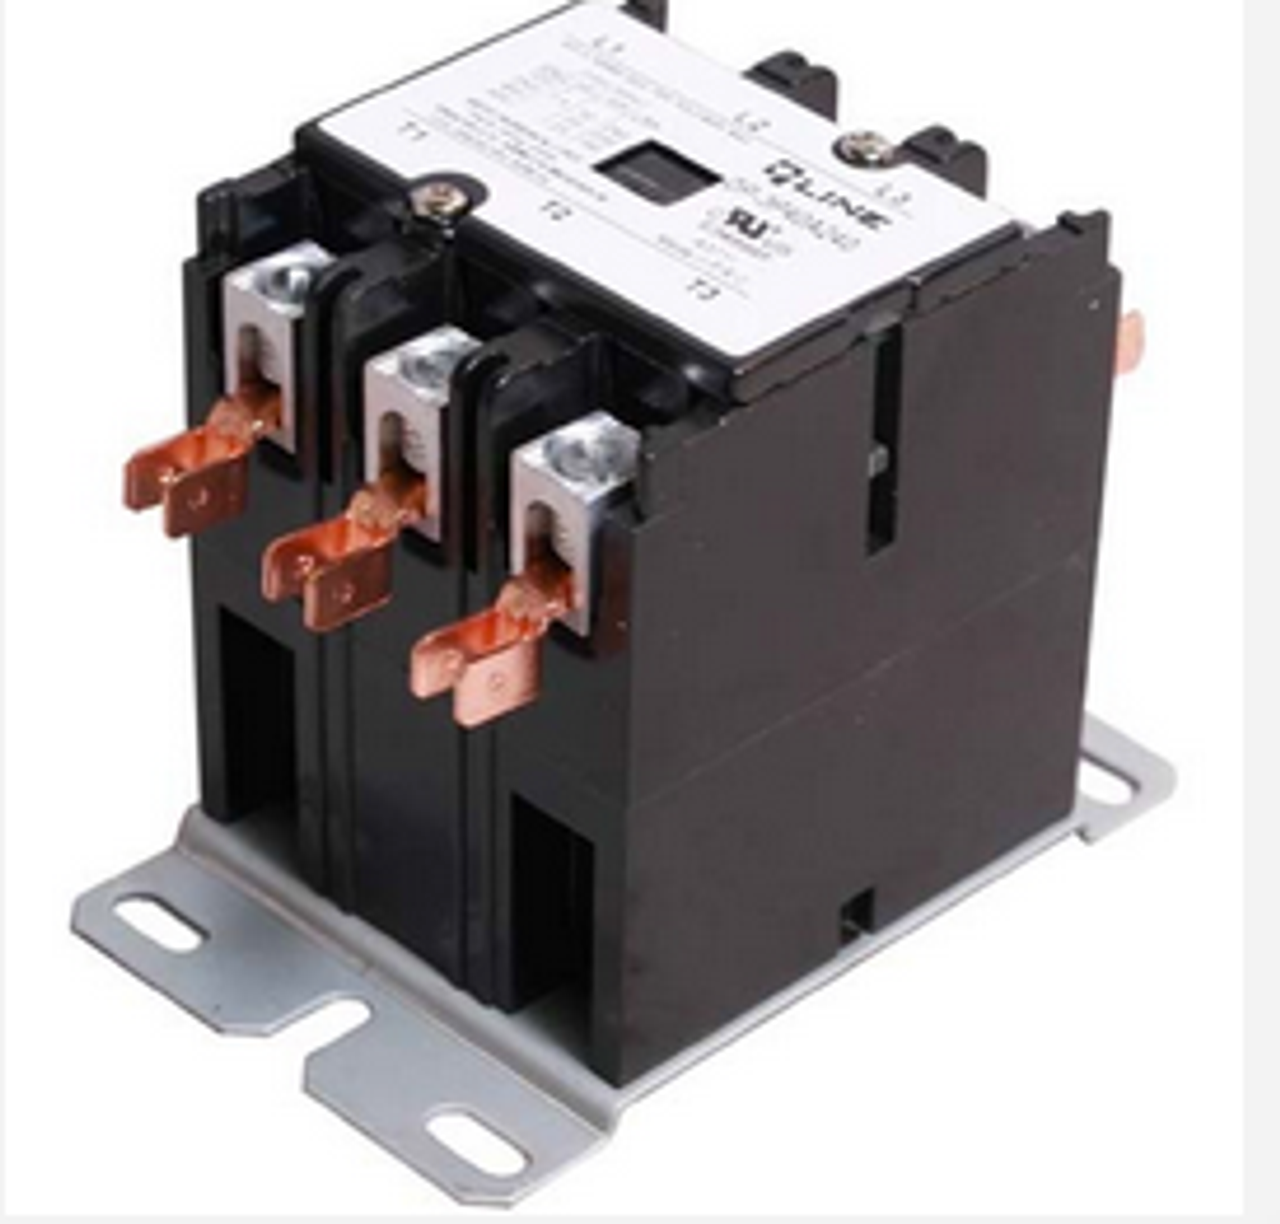 DP-3P50A24 Rotom Magnetic Contactor 3 Pole